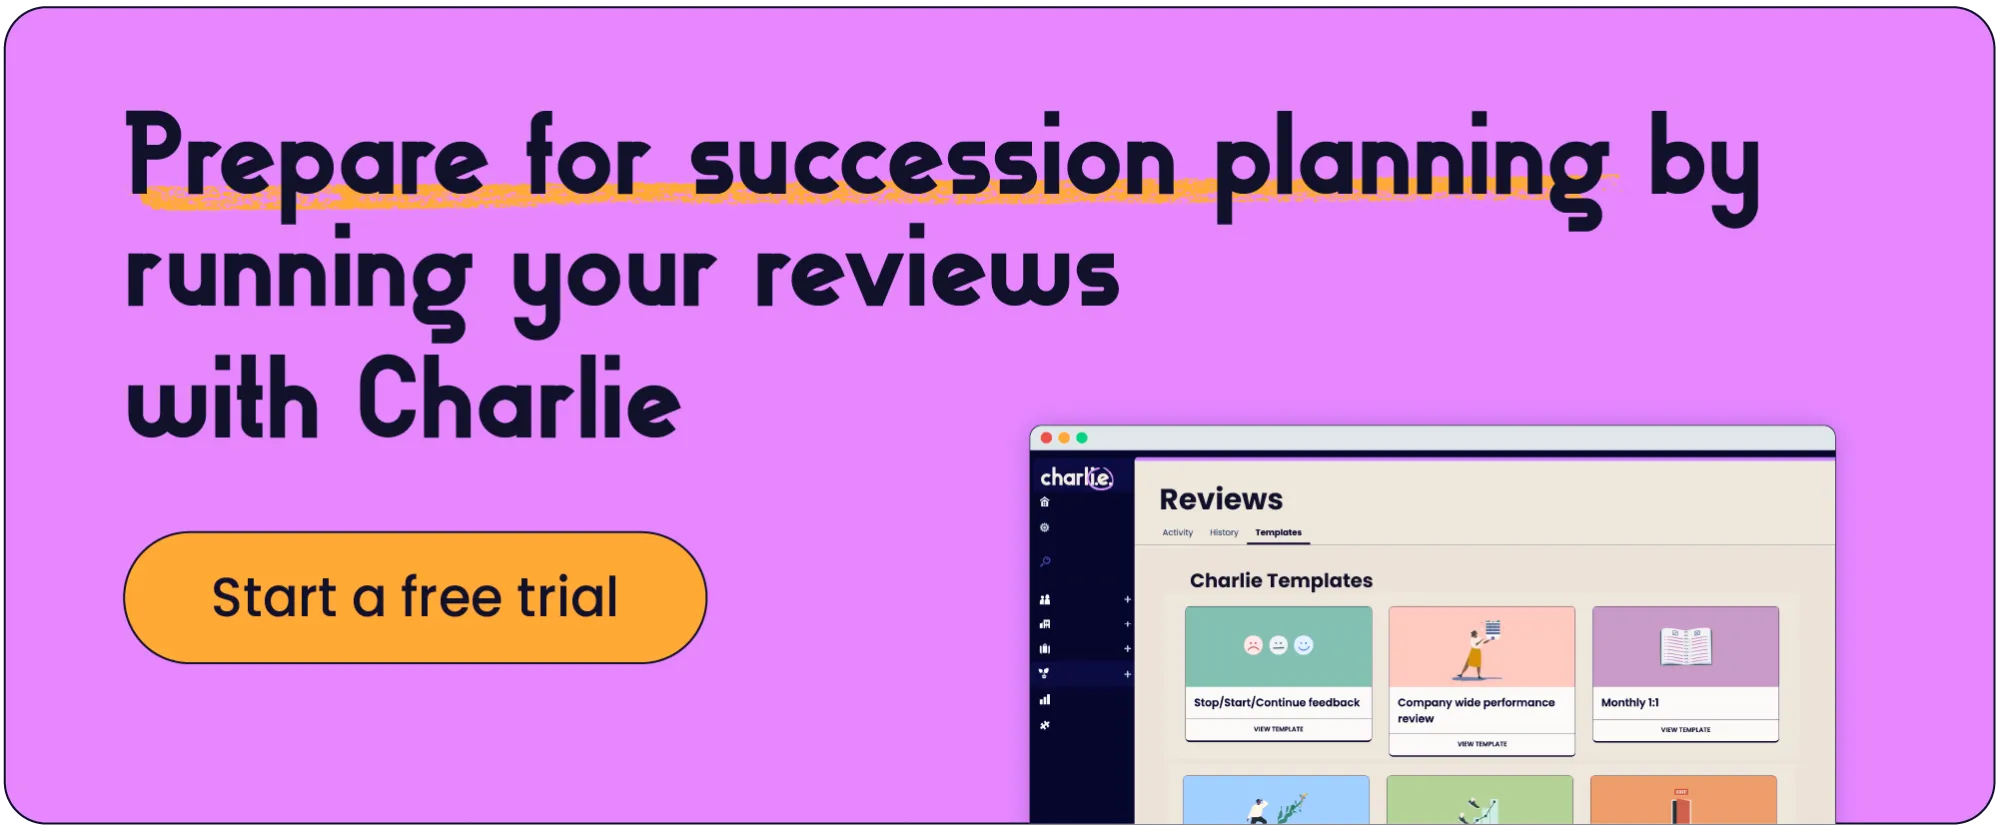 Start your succession planning with Charlie and take a free trial